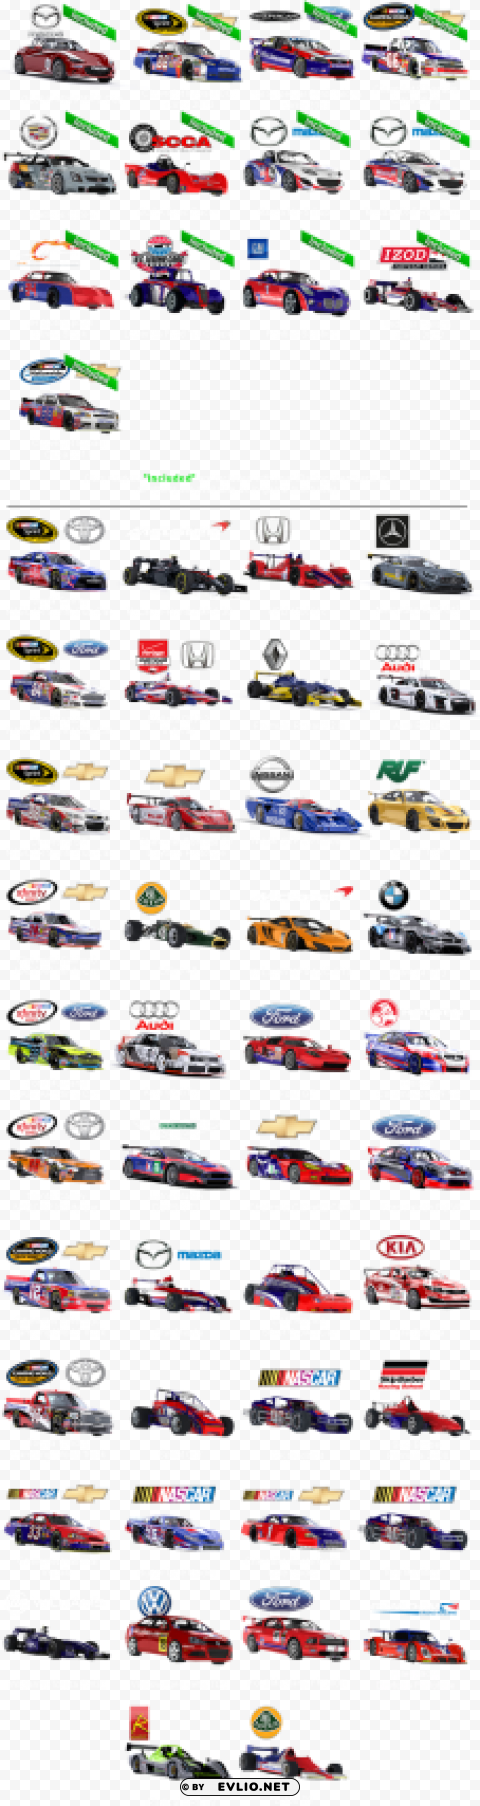 Iracing Car List PNG Image Isolated With High Clarity